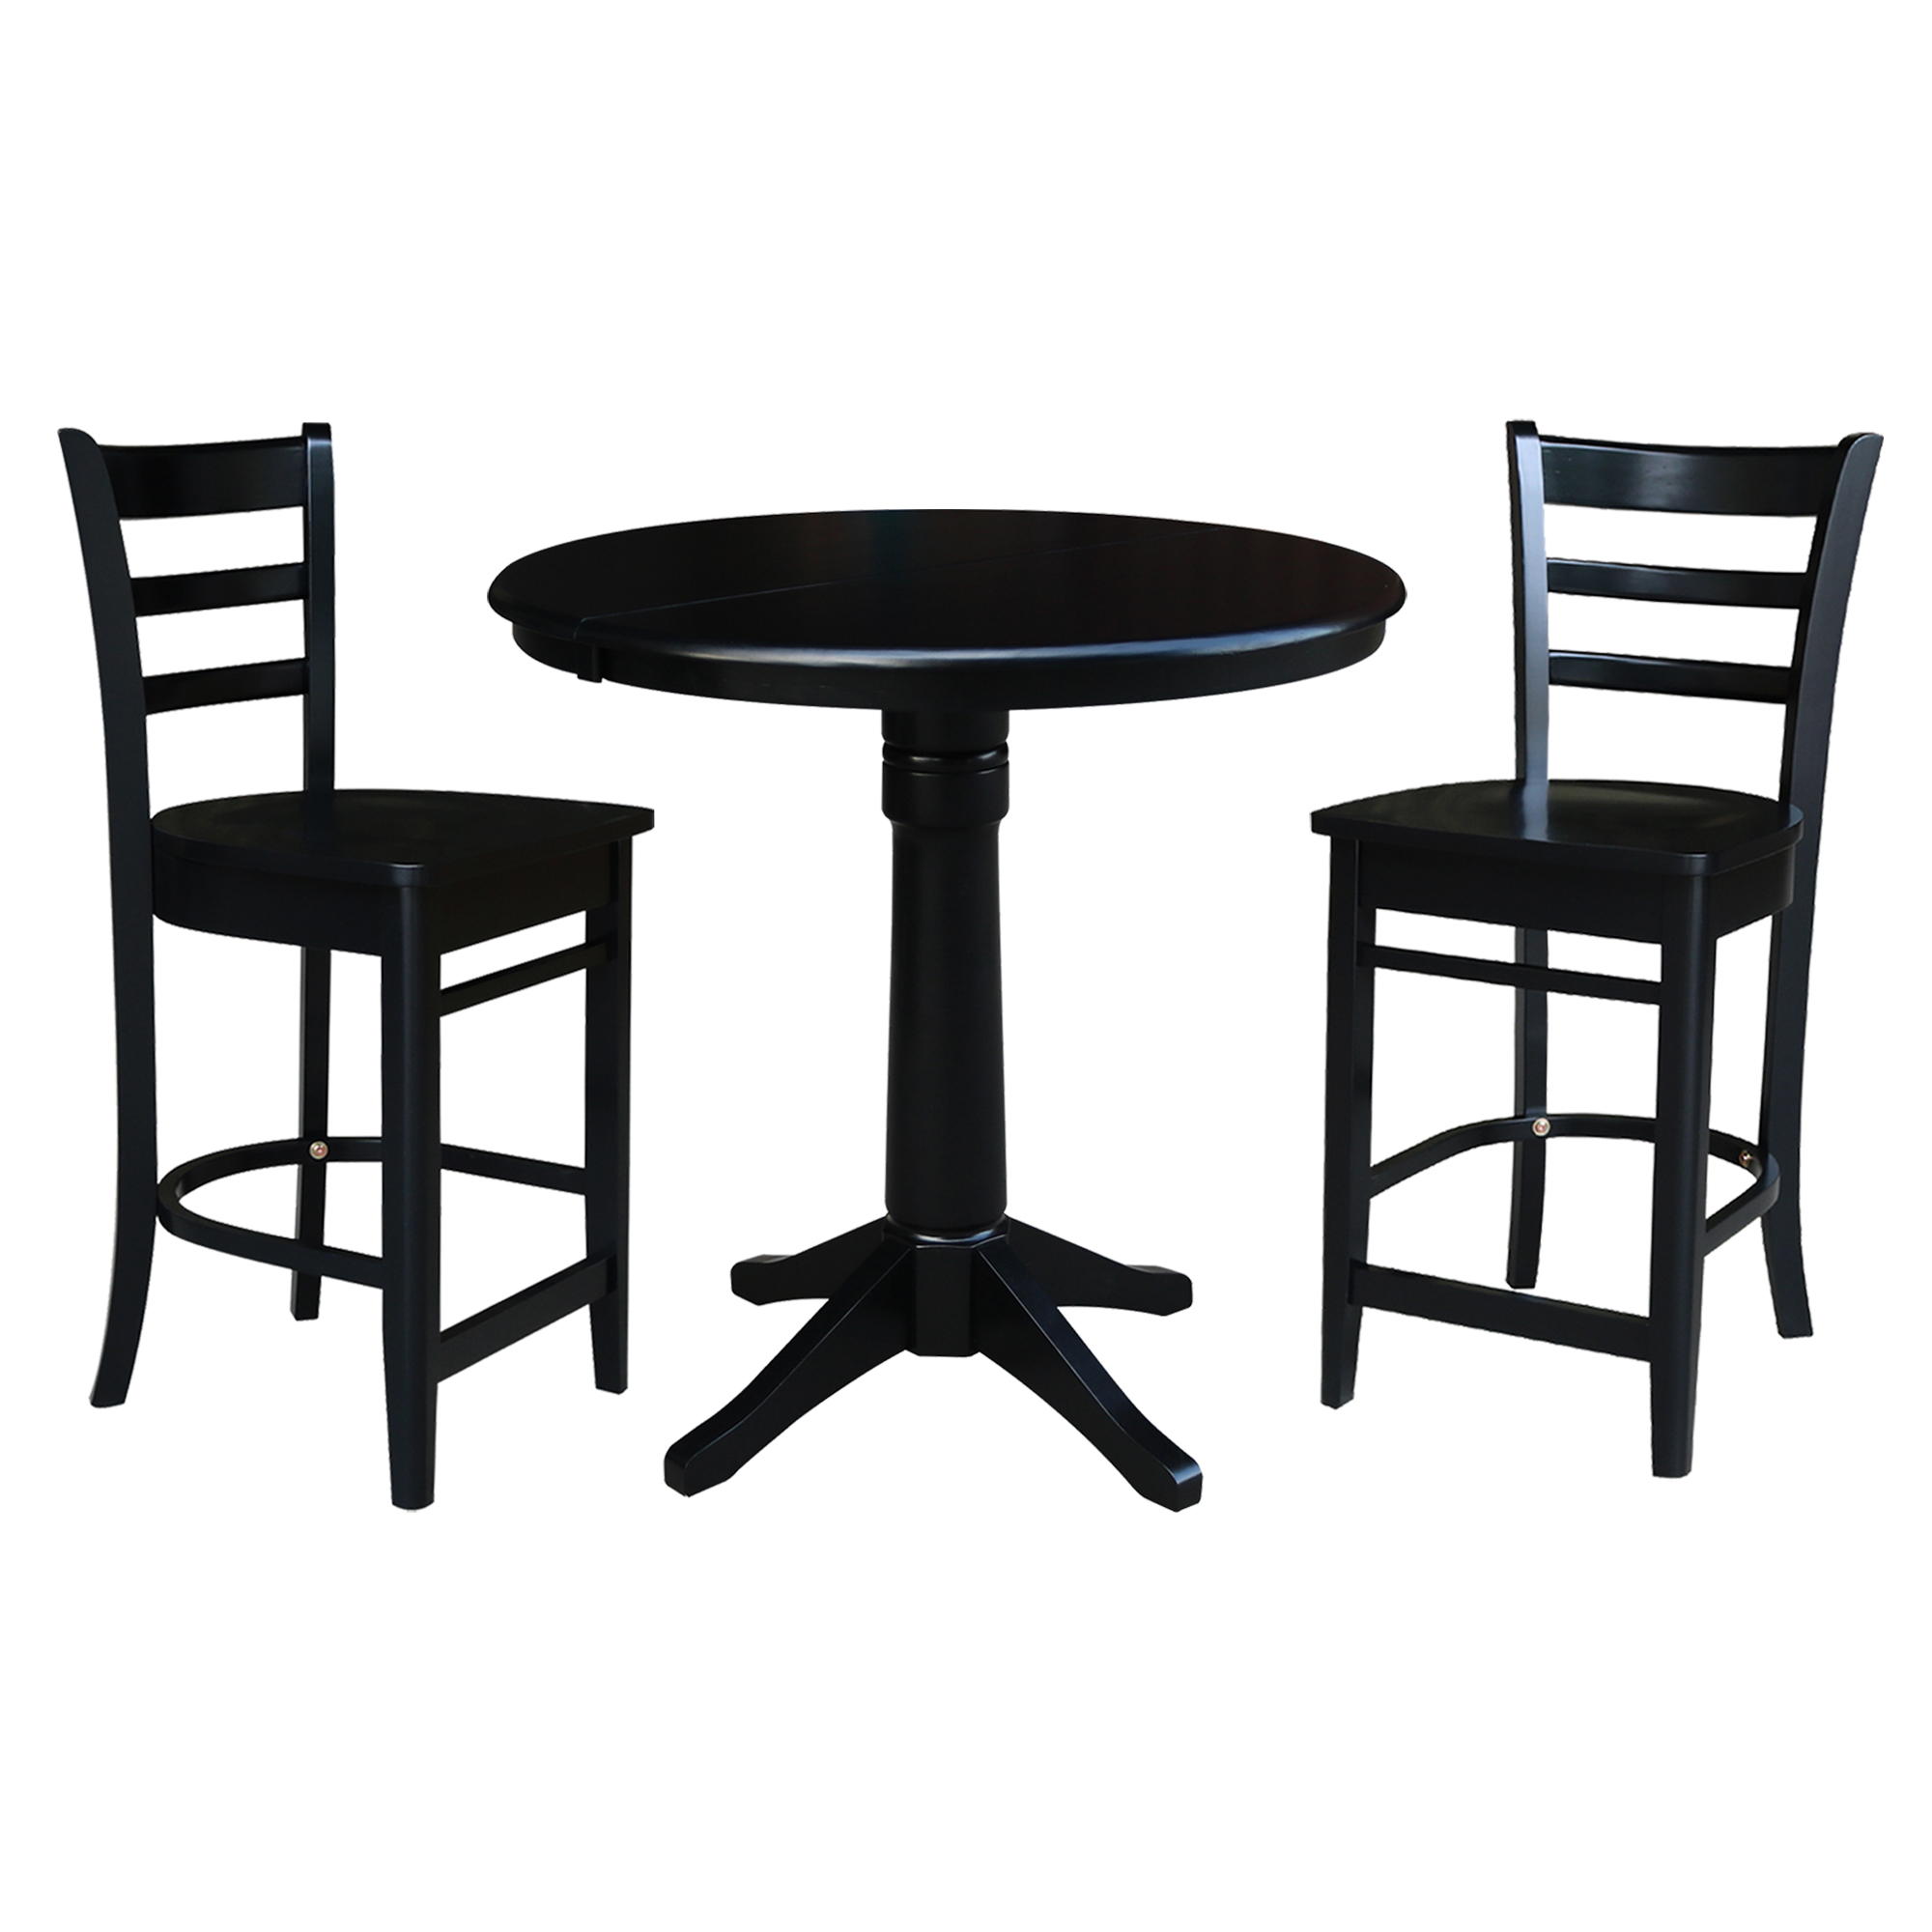 Espresso International Concepts Bar Height 36-Inch Round Extension Table with 12-Inch Leaf